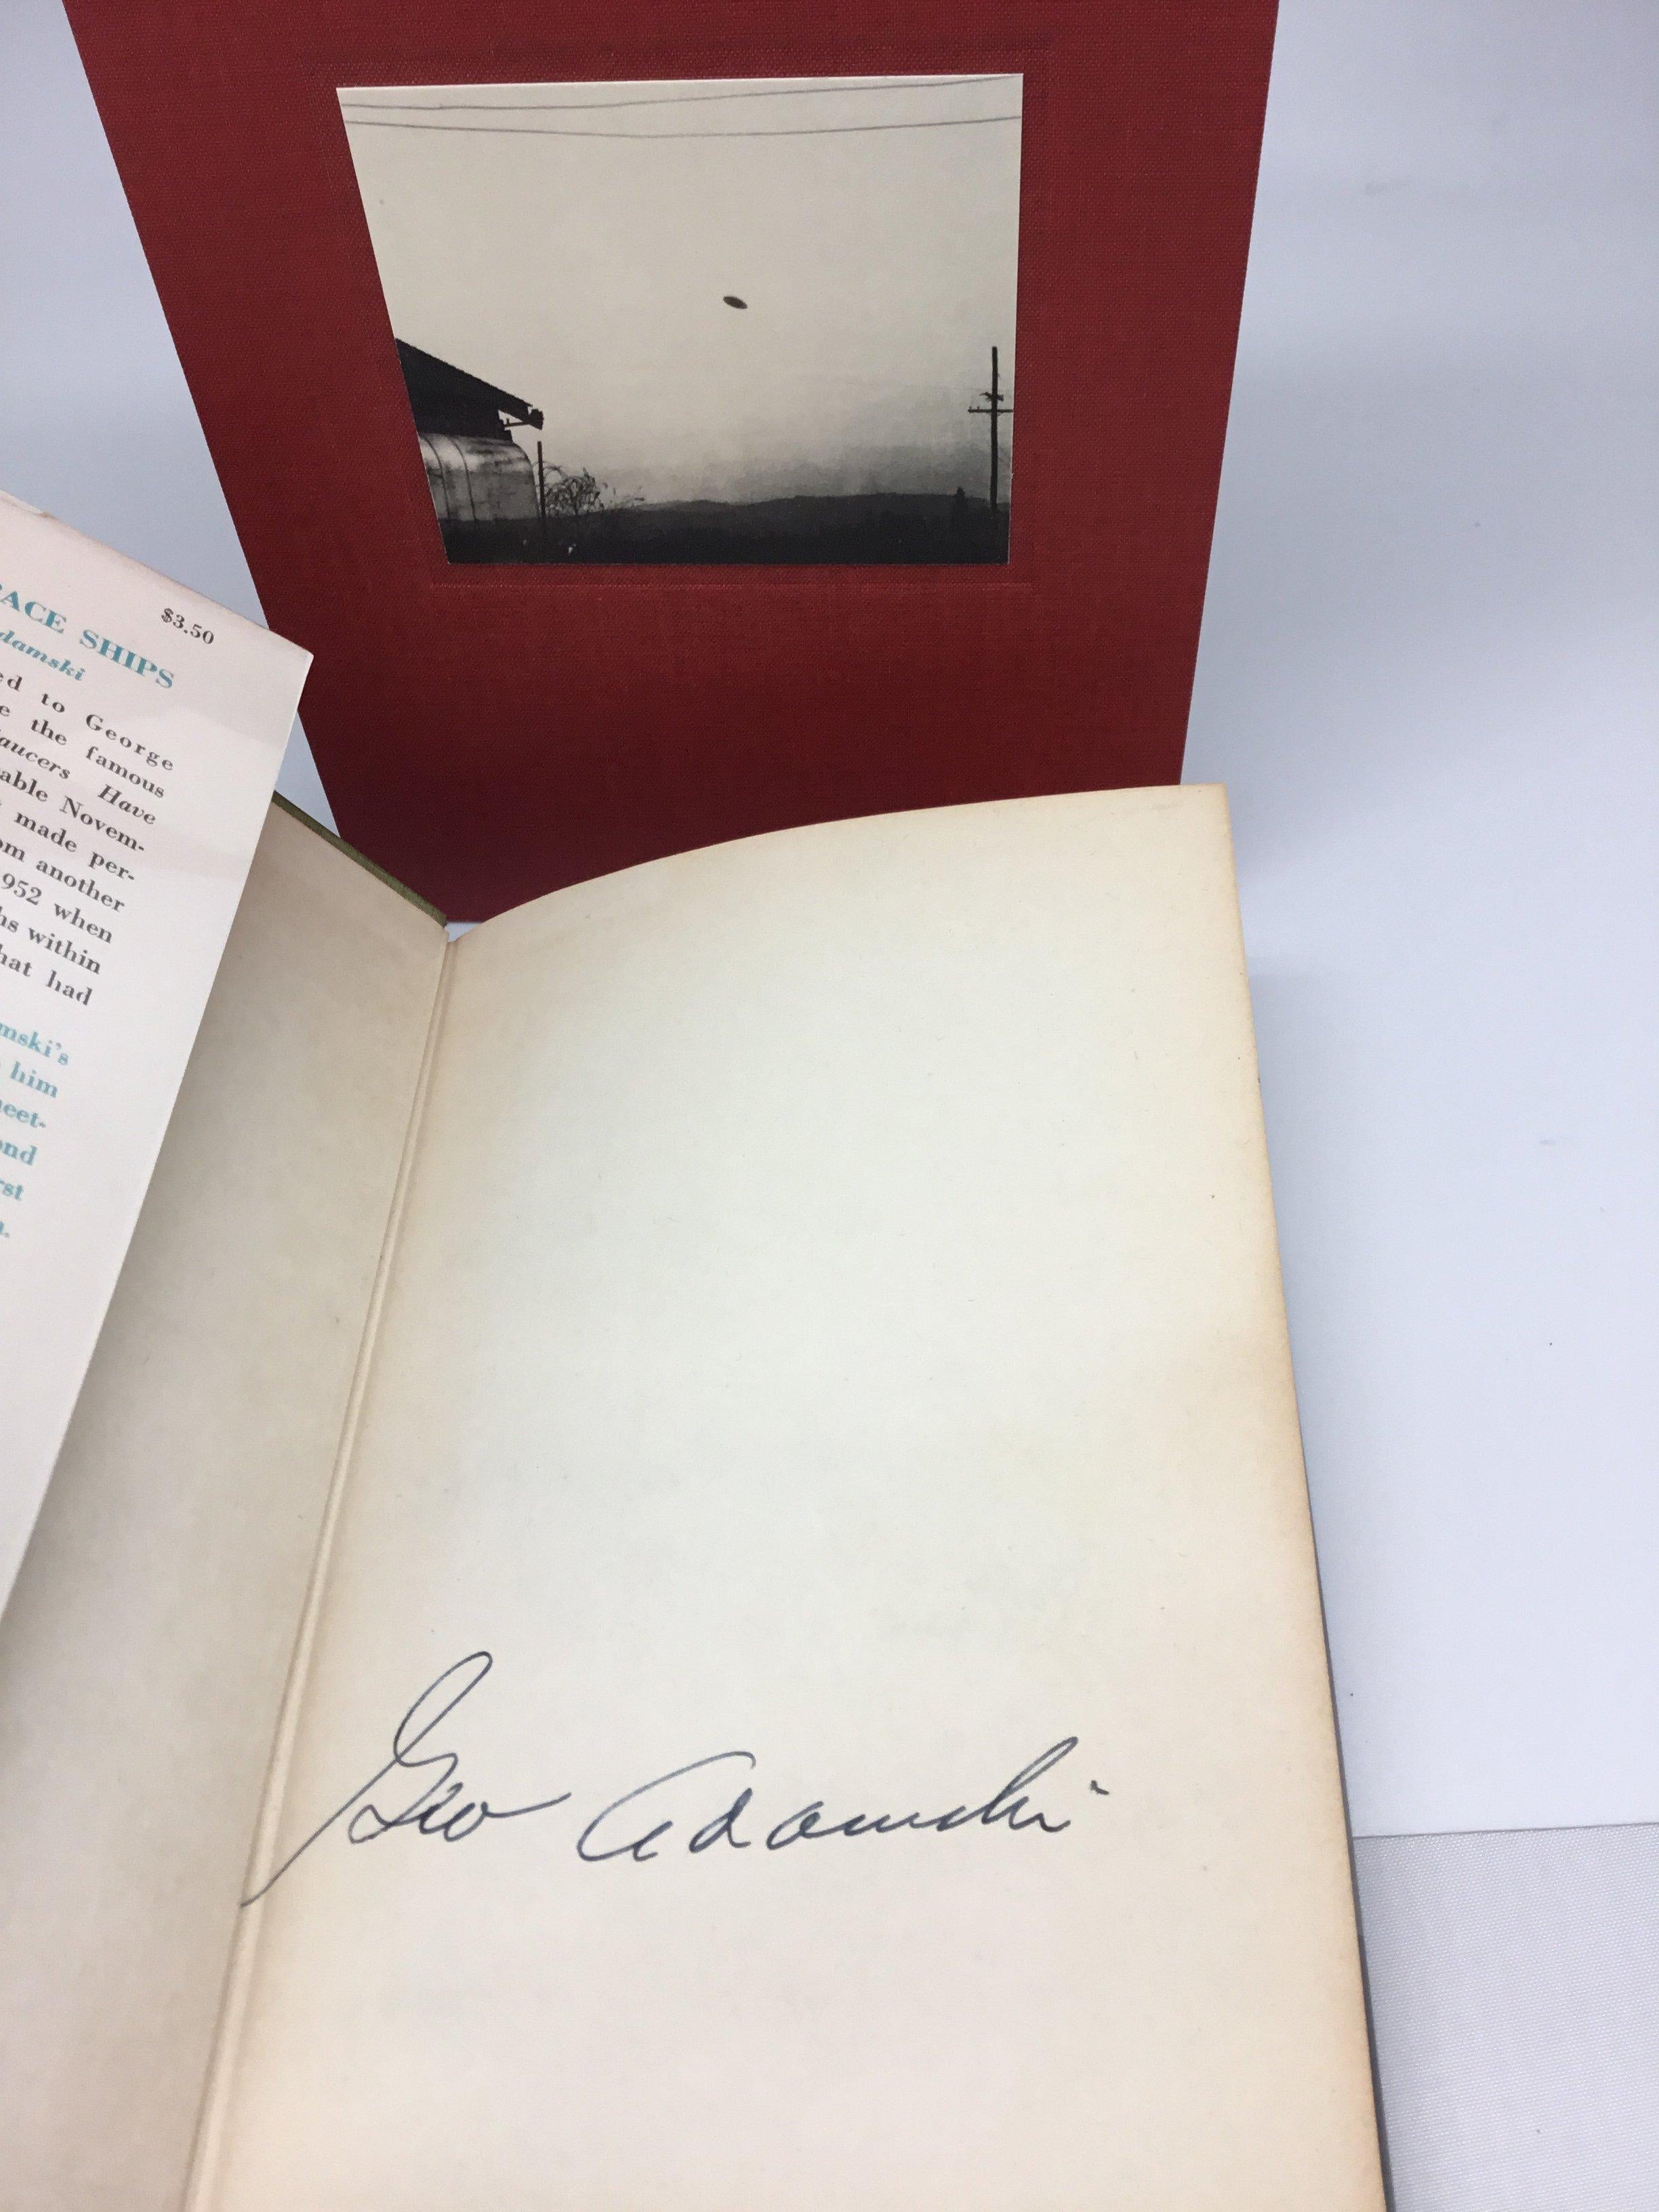 Adamski, George. Inside the Space Ships. New York: Abelard-Schuman, 1955. Signed first edition, third printing. Original dust jacket. Housed in custom slipcase.

Are we alone in the universe? This timeless question is addressed by George Adamski